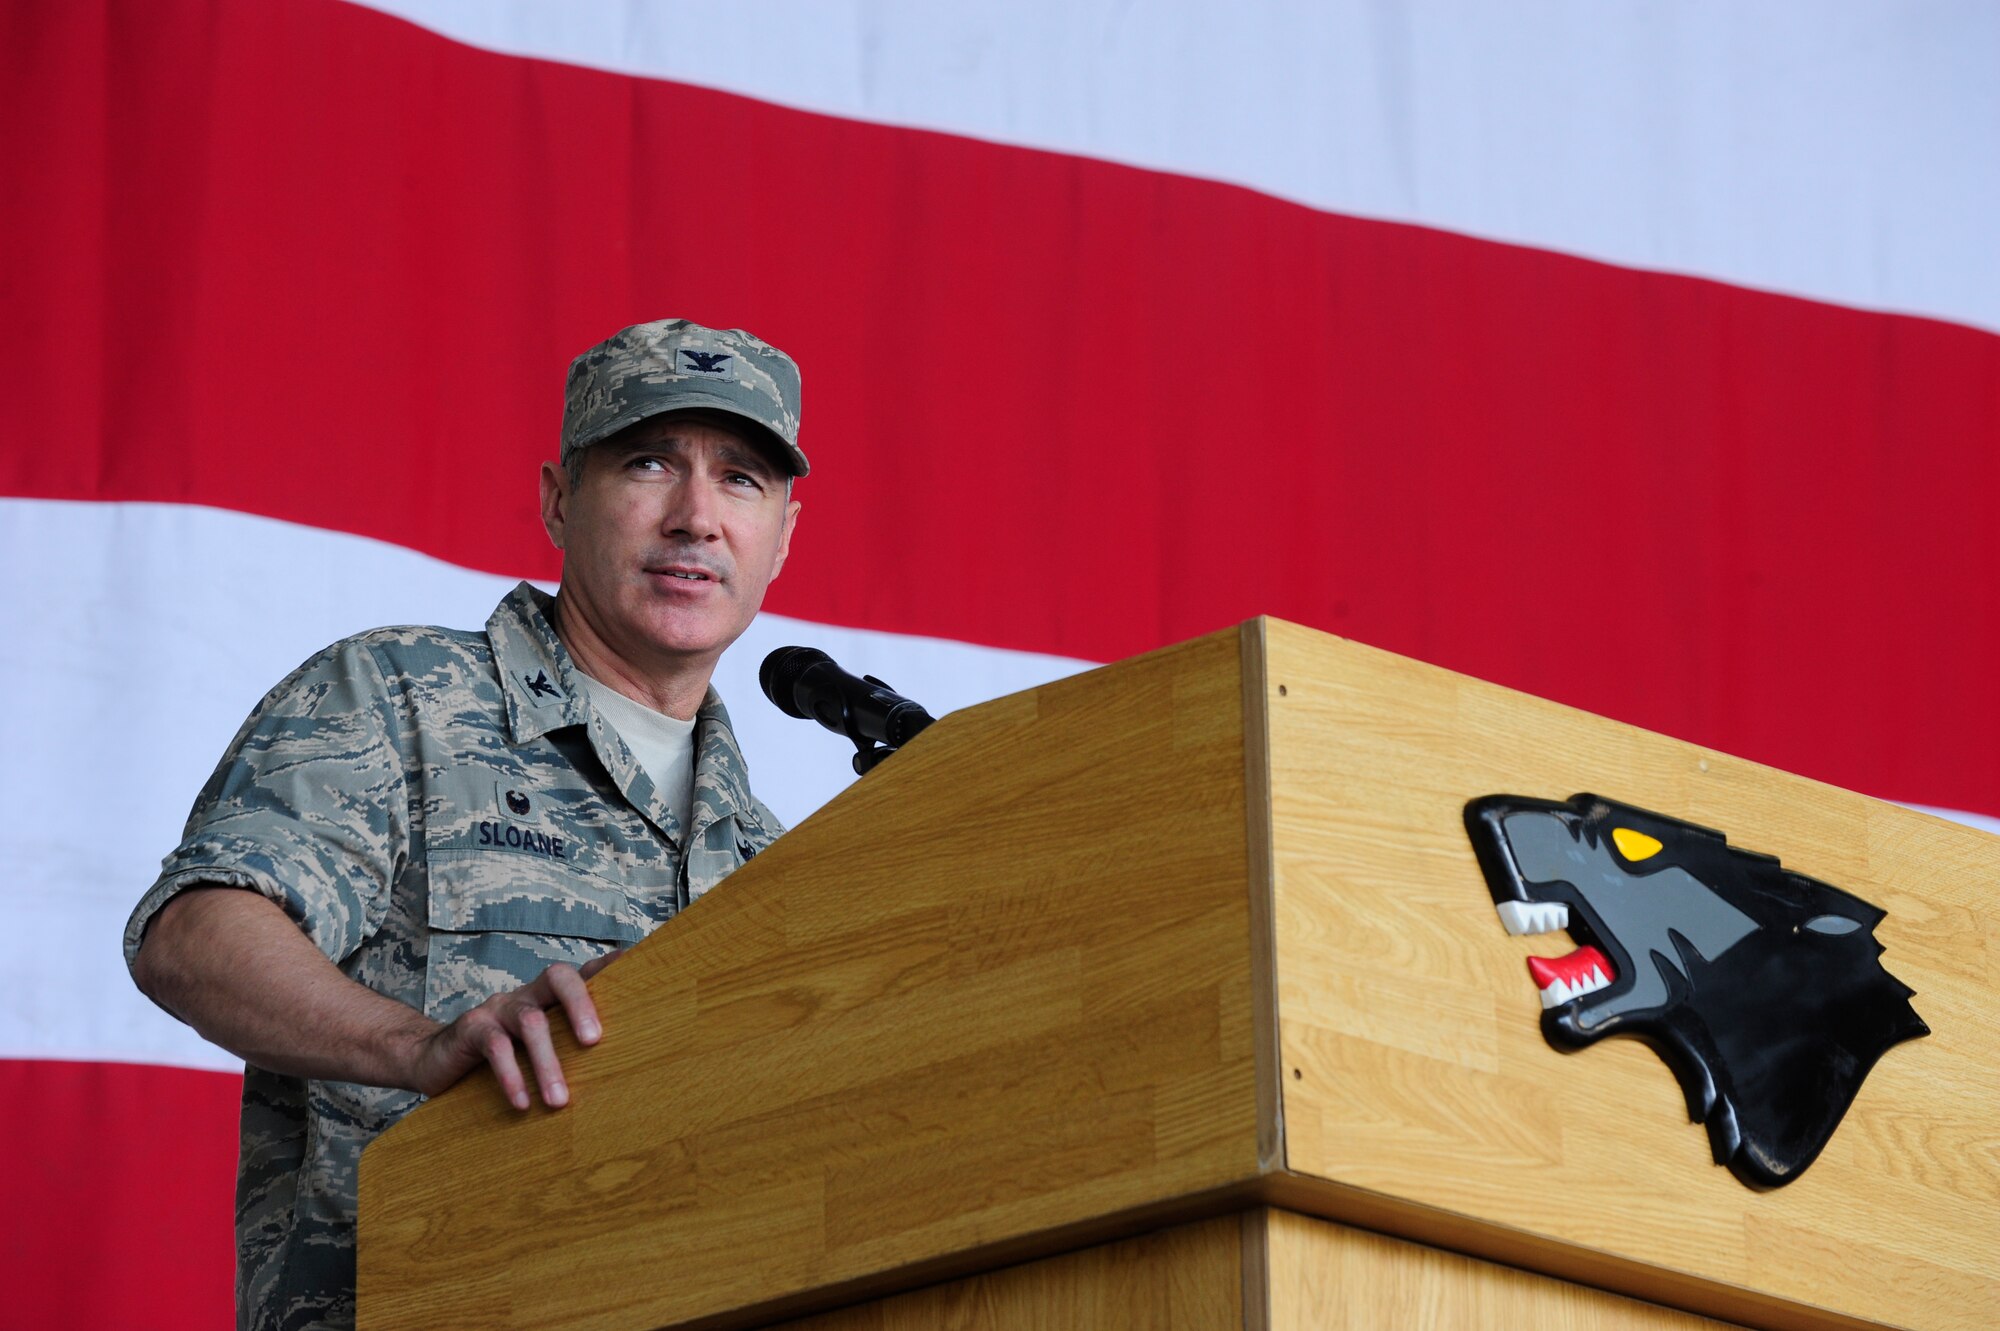 Col. Jeremy Sloane, 8th Fighter Wing commander, gives a speech during a 9-11 Remembrance Day Ceremony at Kunsan Air Base, Republic of Korea, Sept. 11, 2015. United States Air Force Airmen and Republic of Korea air force members attended the ceremony to the remember the events that occurred during the terrorist attacks14 years ago. (U.S. Air Force photo by Staff Sgt. Nick Wilson/Released)